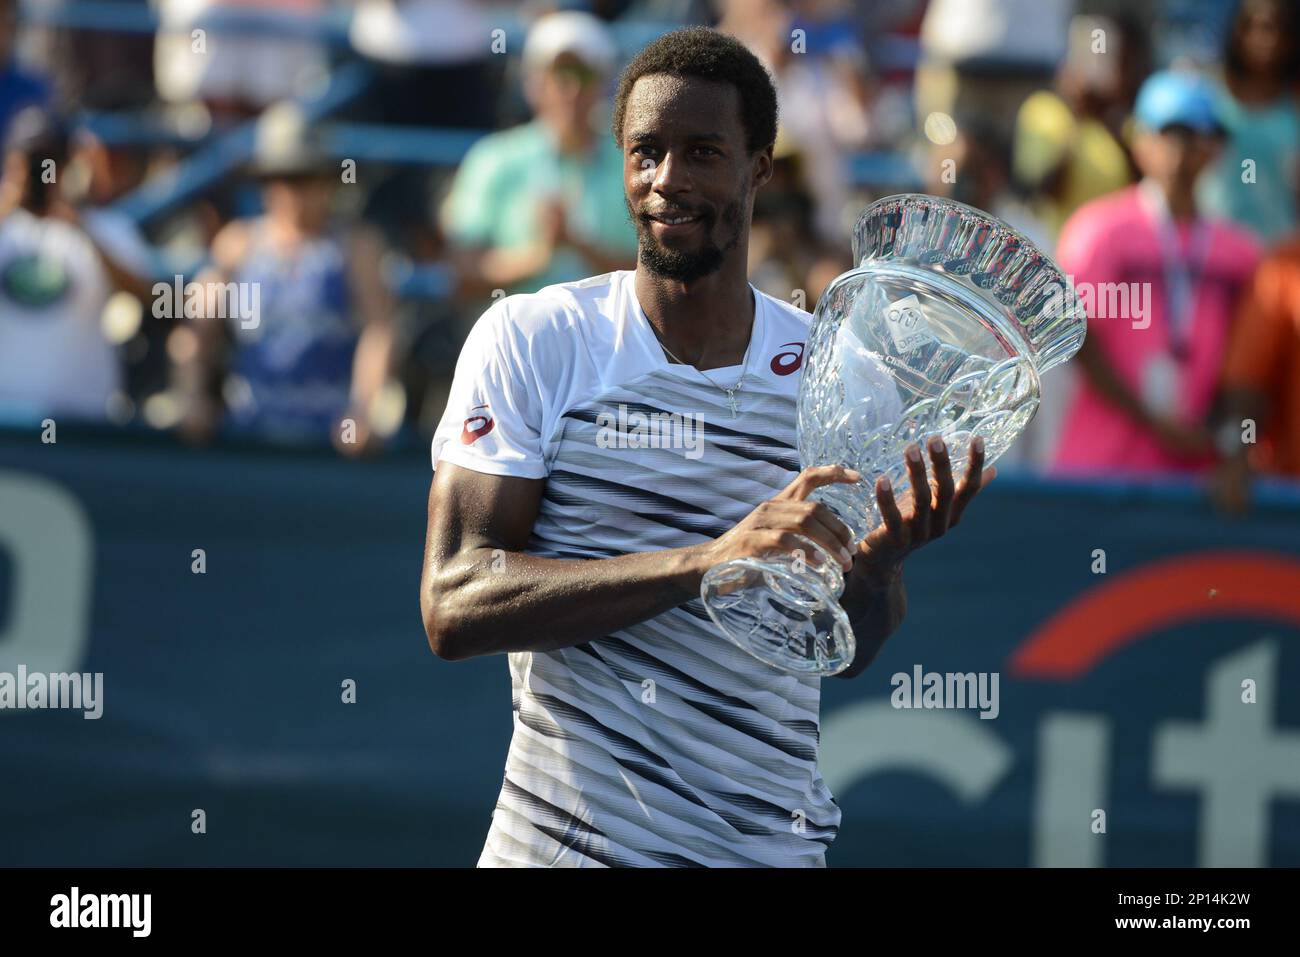 July 24, 2016 - Washington D.C, United States - GAEL MONFILS of France with  his trophy after winning